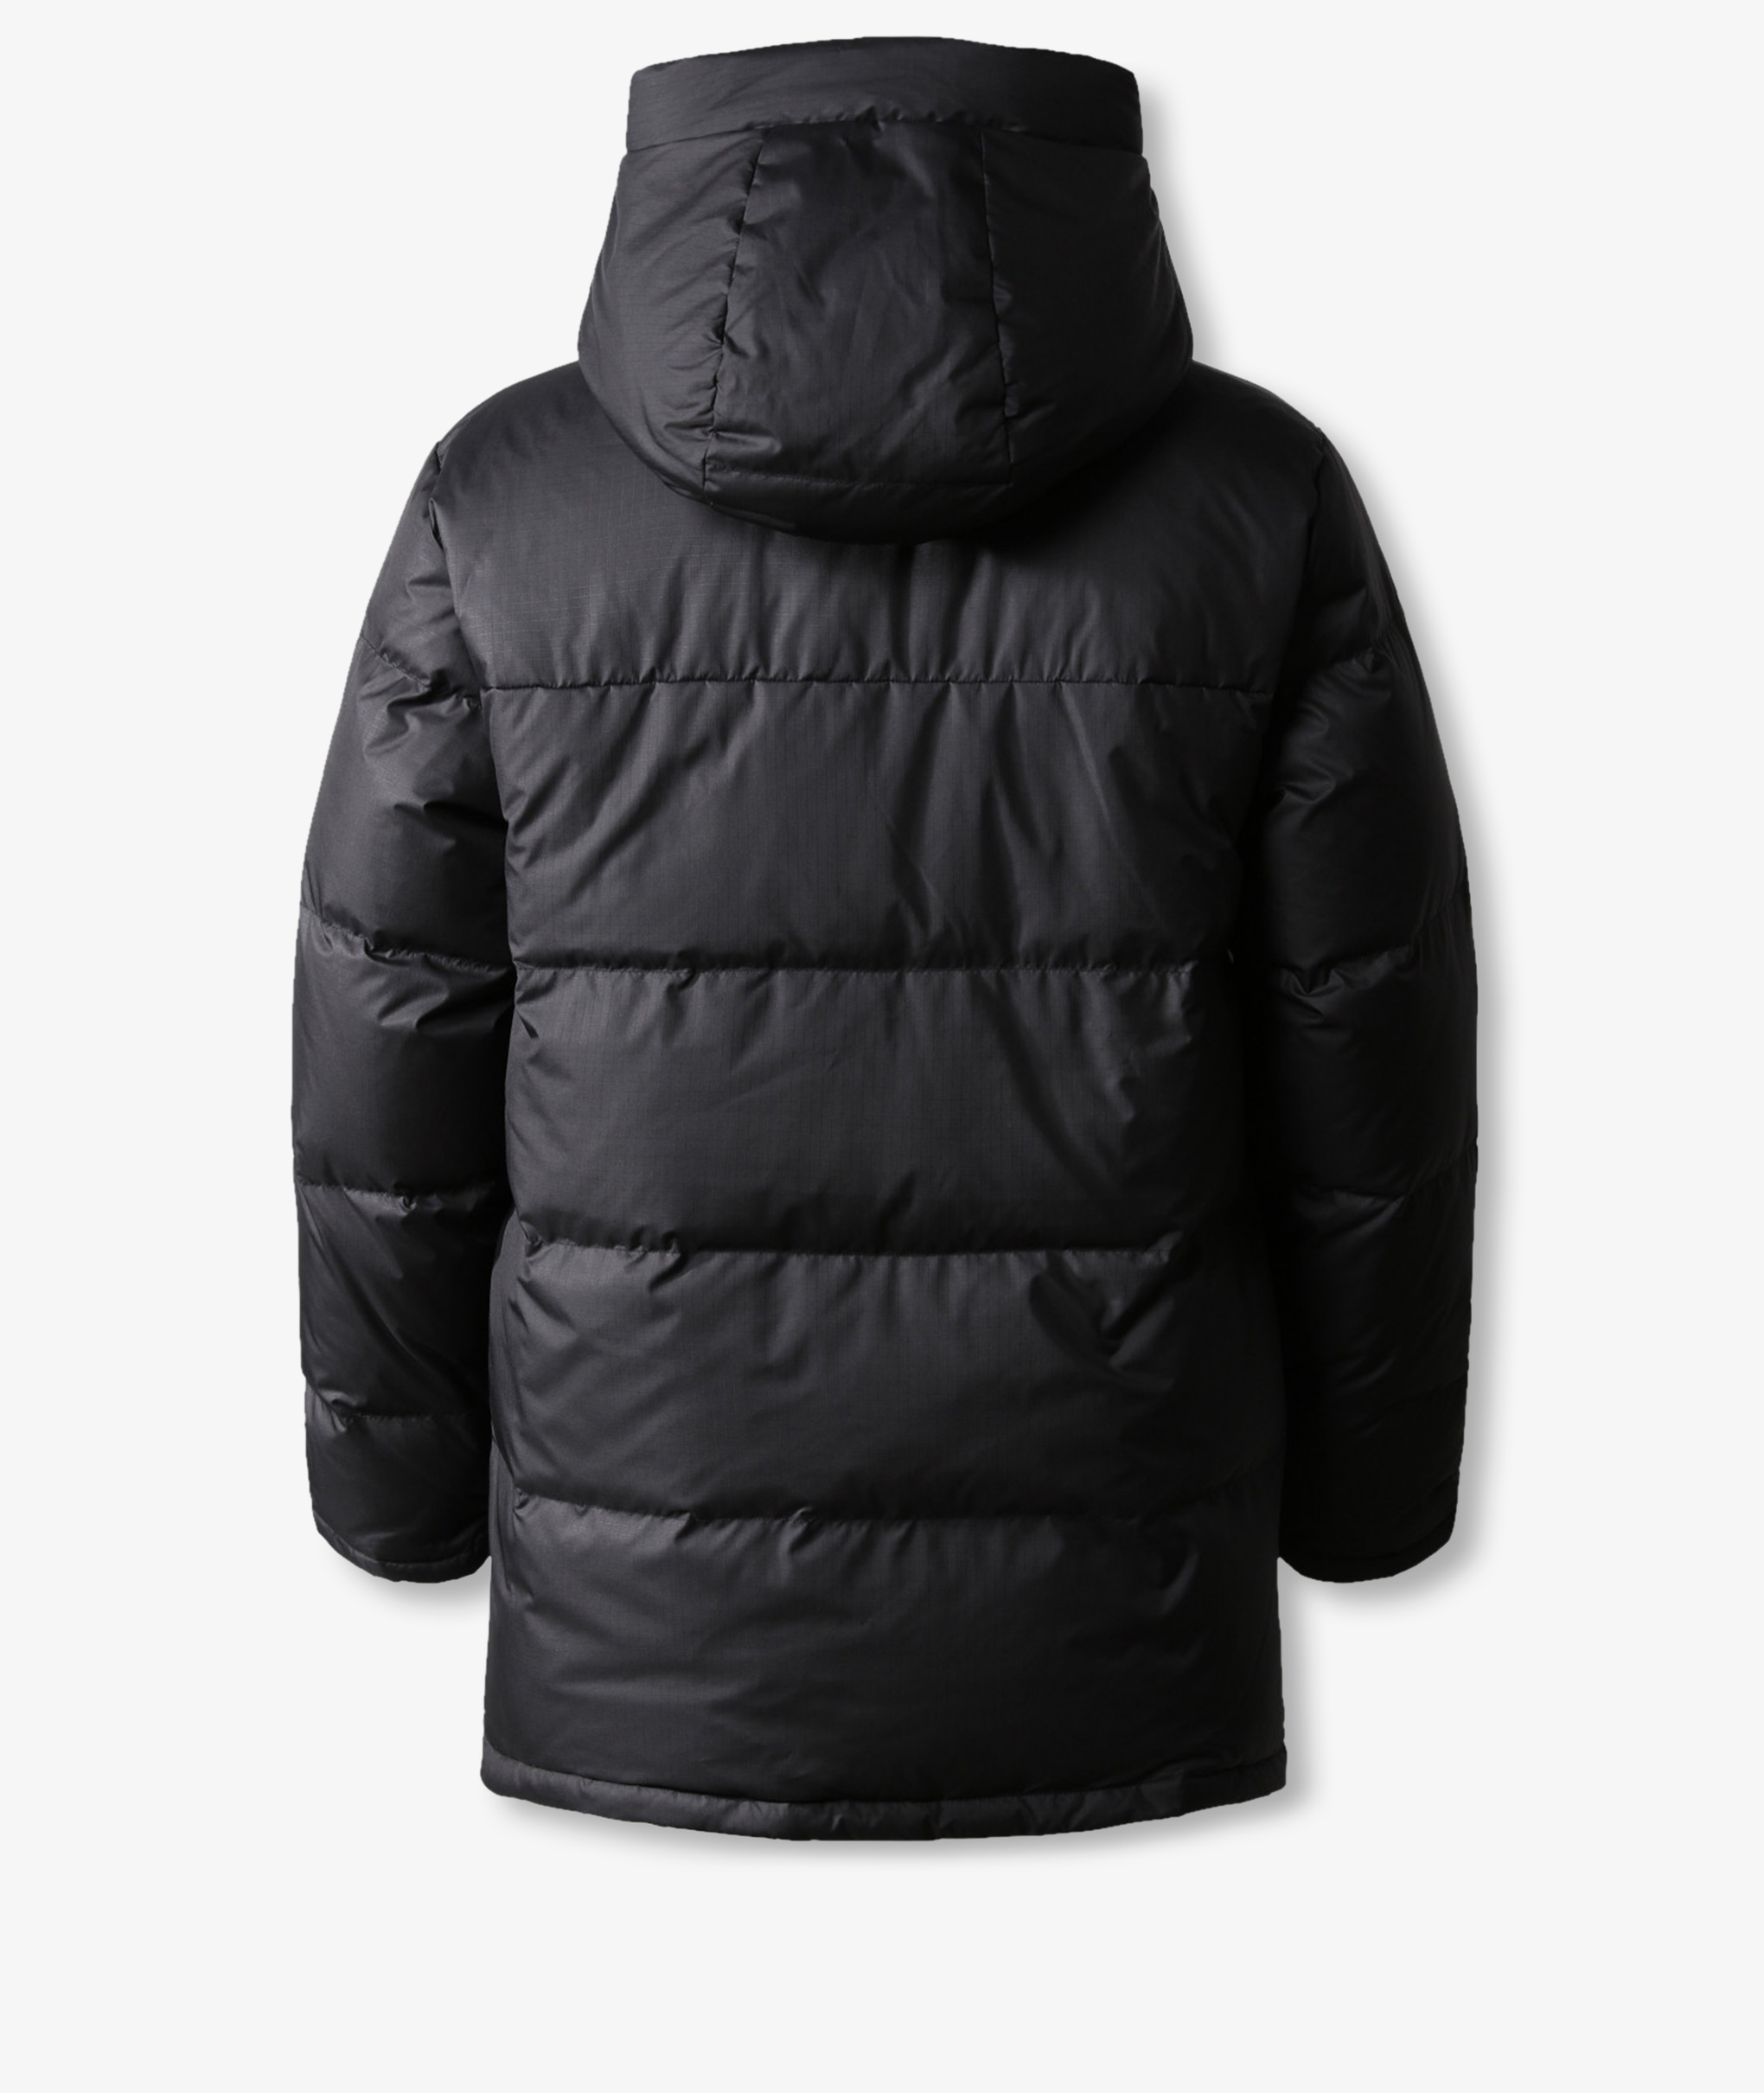 Norse Store | Shipping Worldwide - The North Face 77 Brooks Range